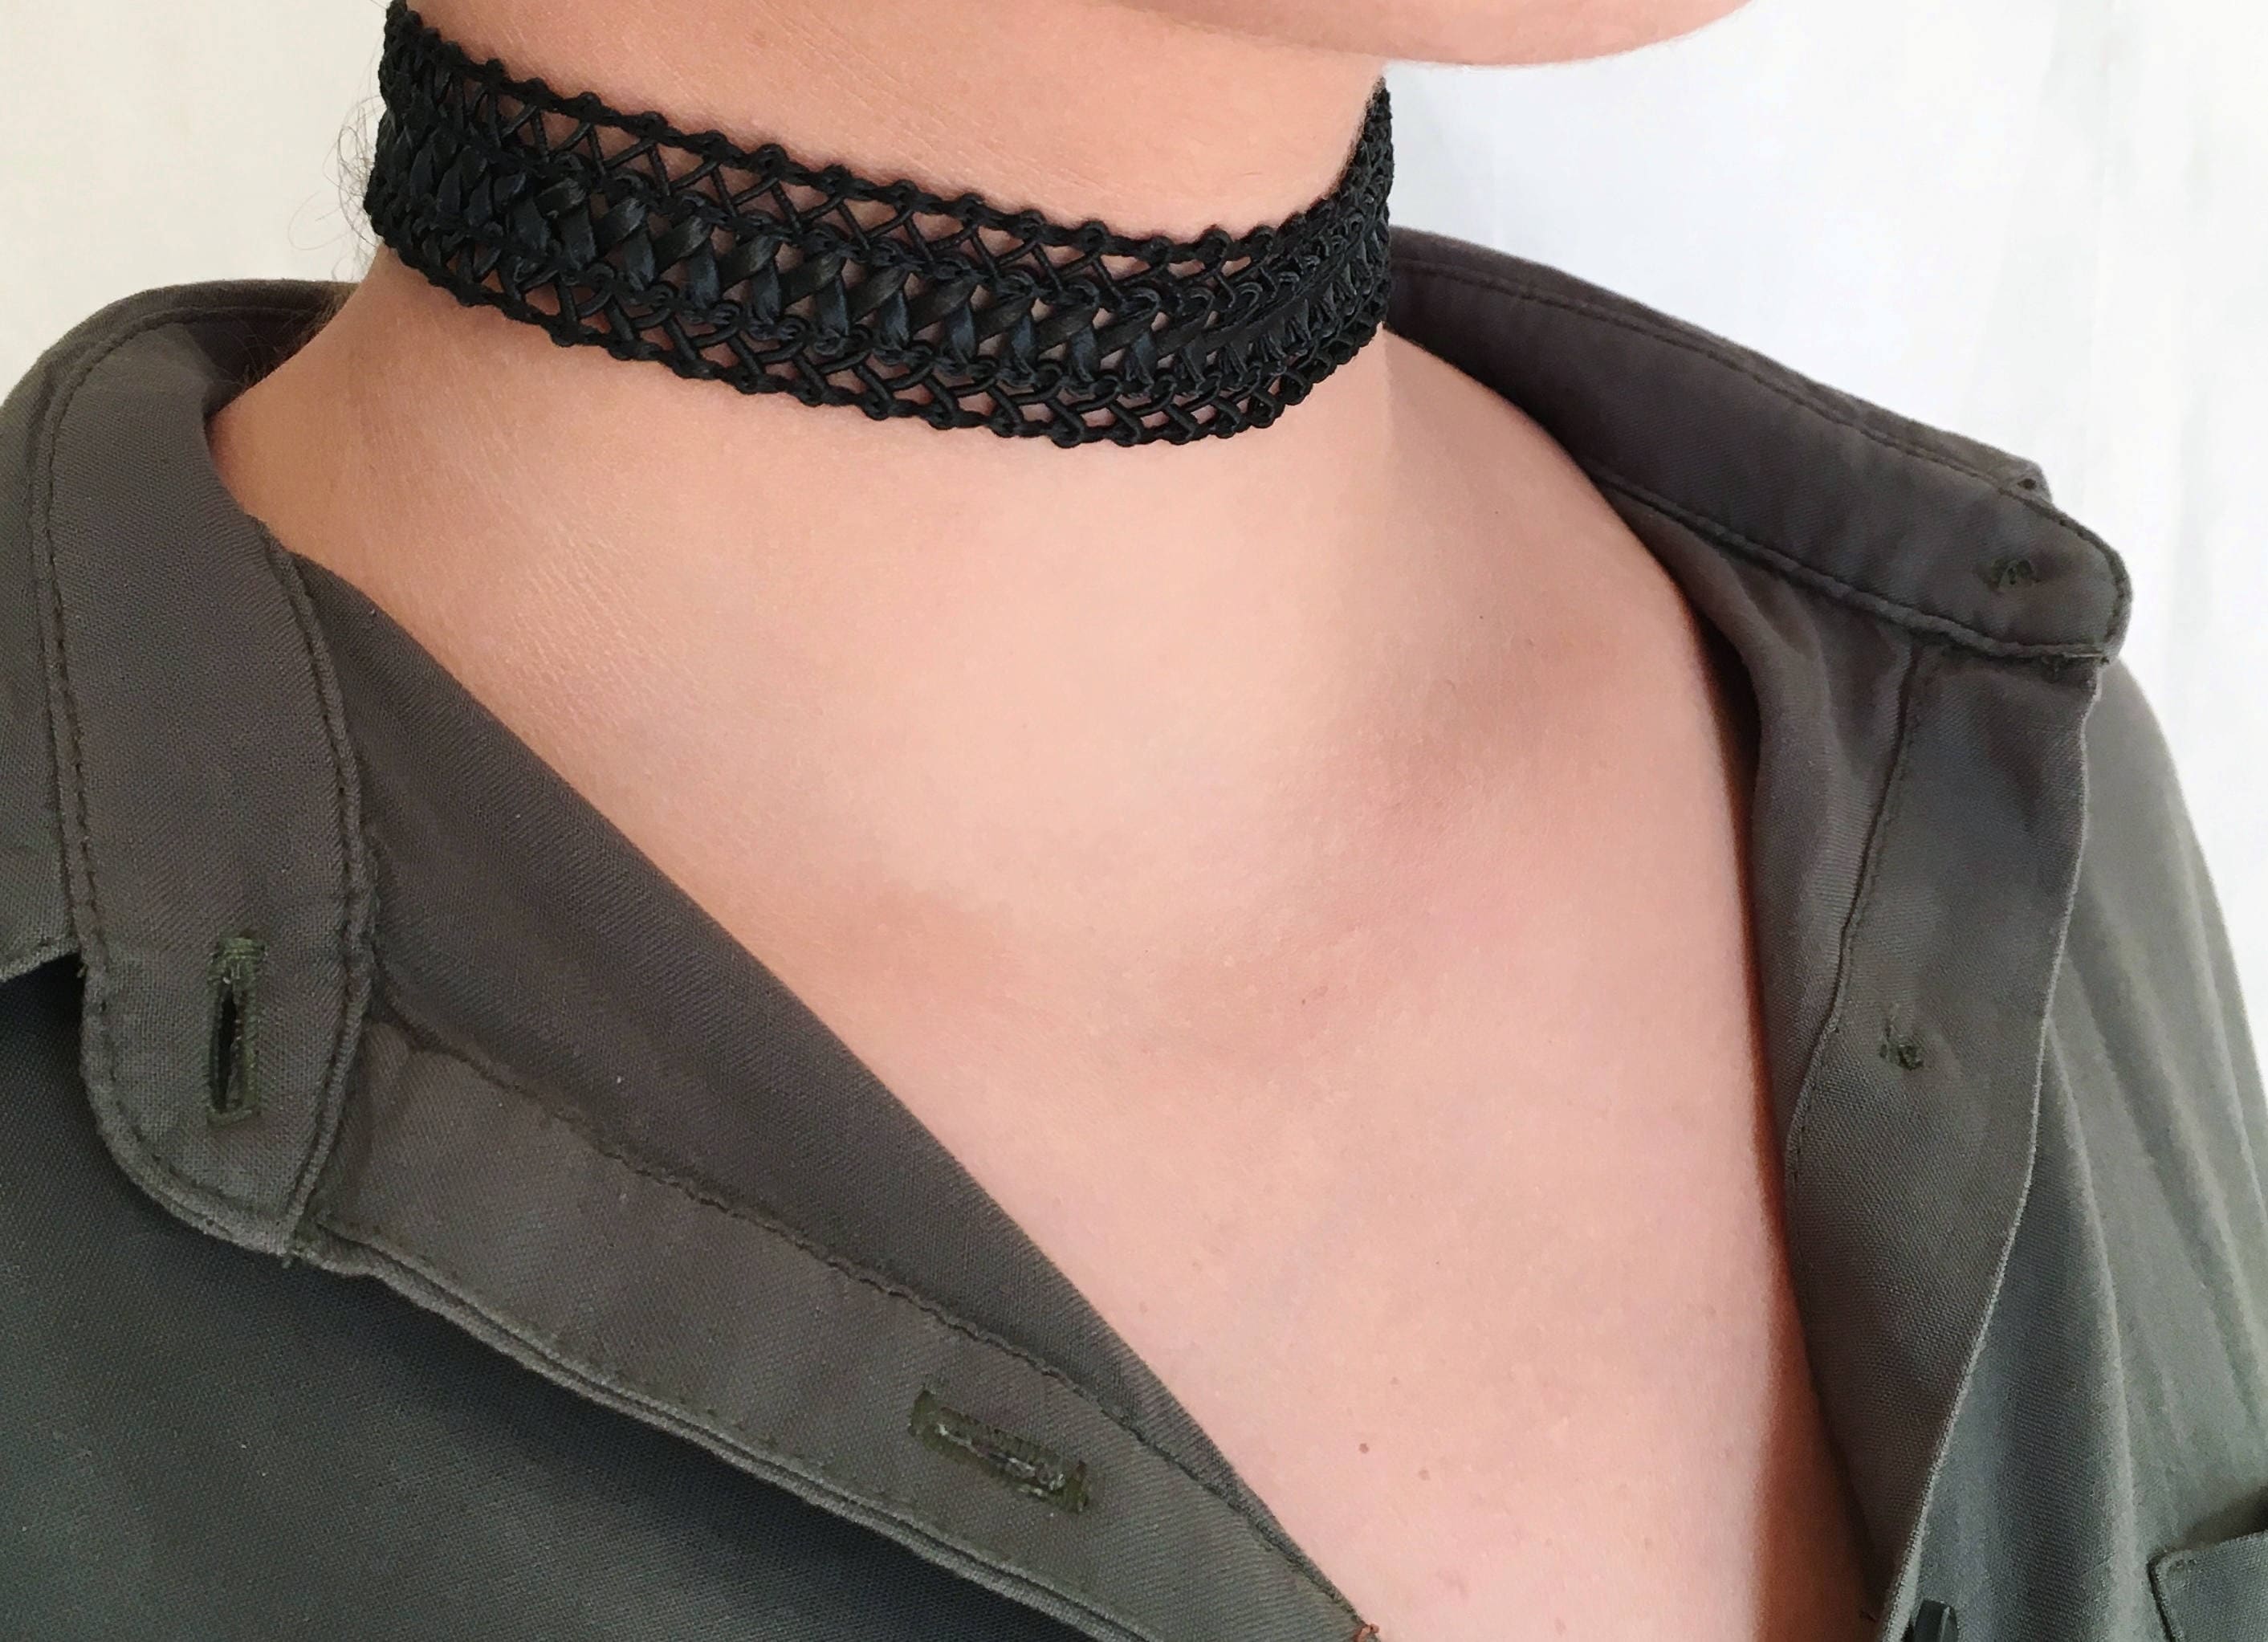 Multilayer Lace Tattoo Choker Black | The Boho Boutique